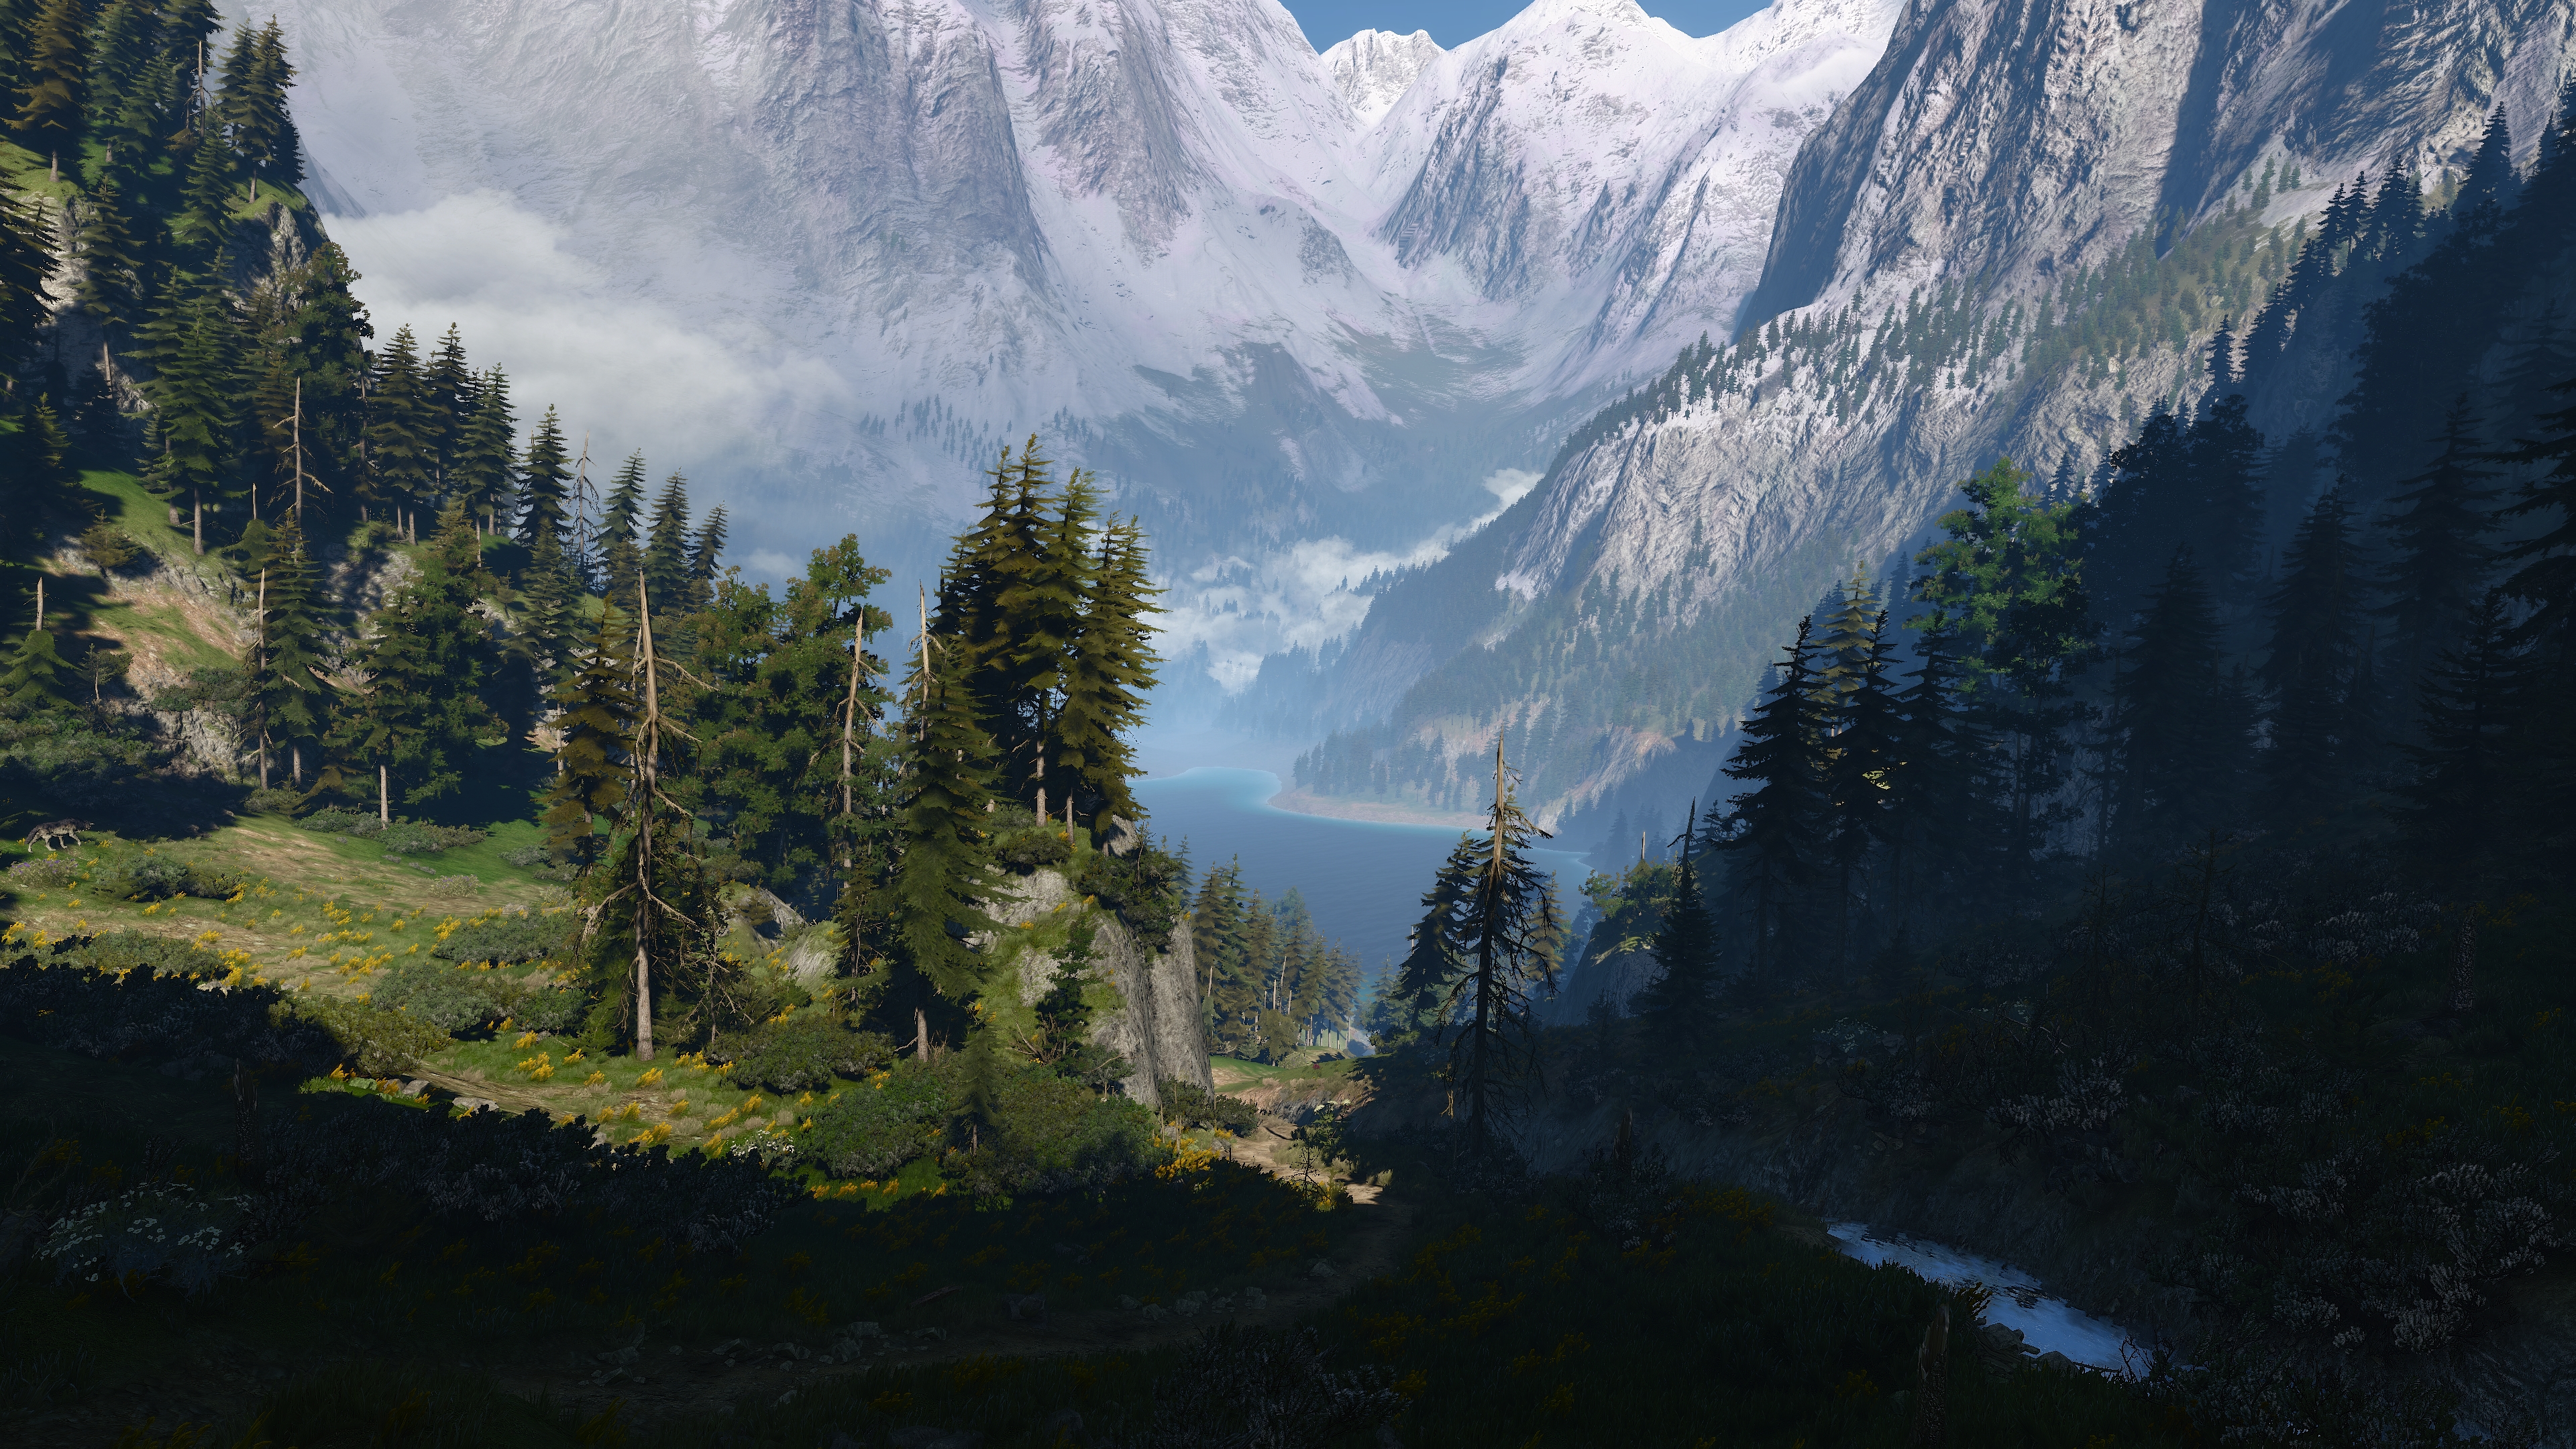 General 3840x2160 The Witcher 3: Wild Hunt screen shot PC gaming Kaer Morhen video games video game art digital art mountains water lake trees clouds snow forest CGI sunlight landscape nature